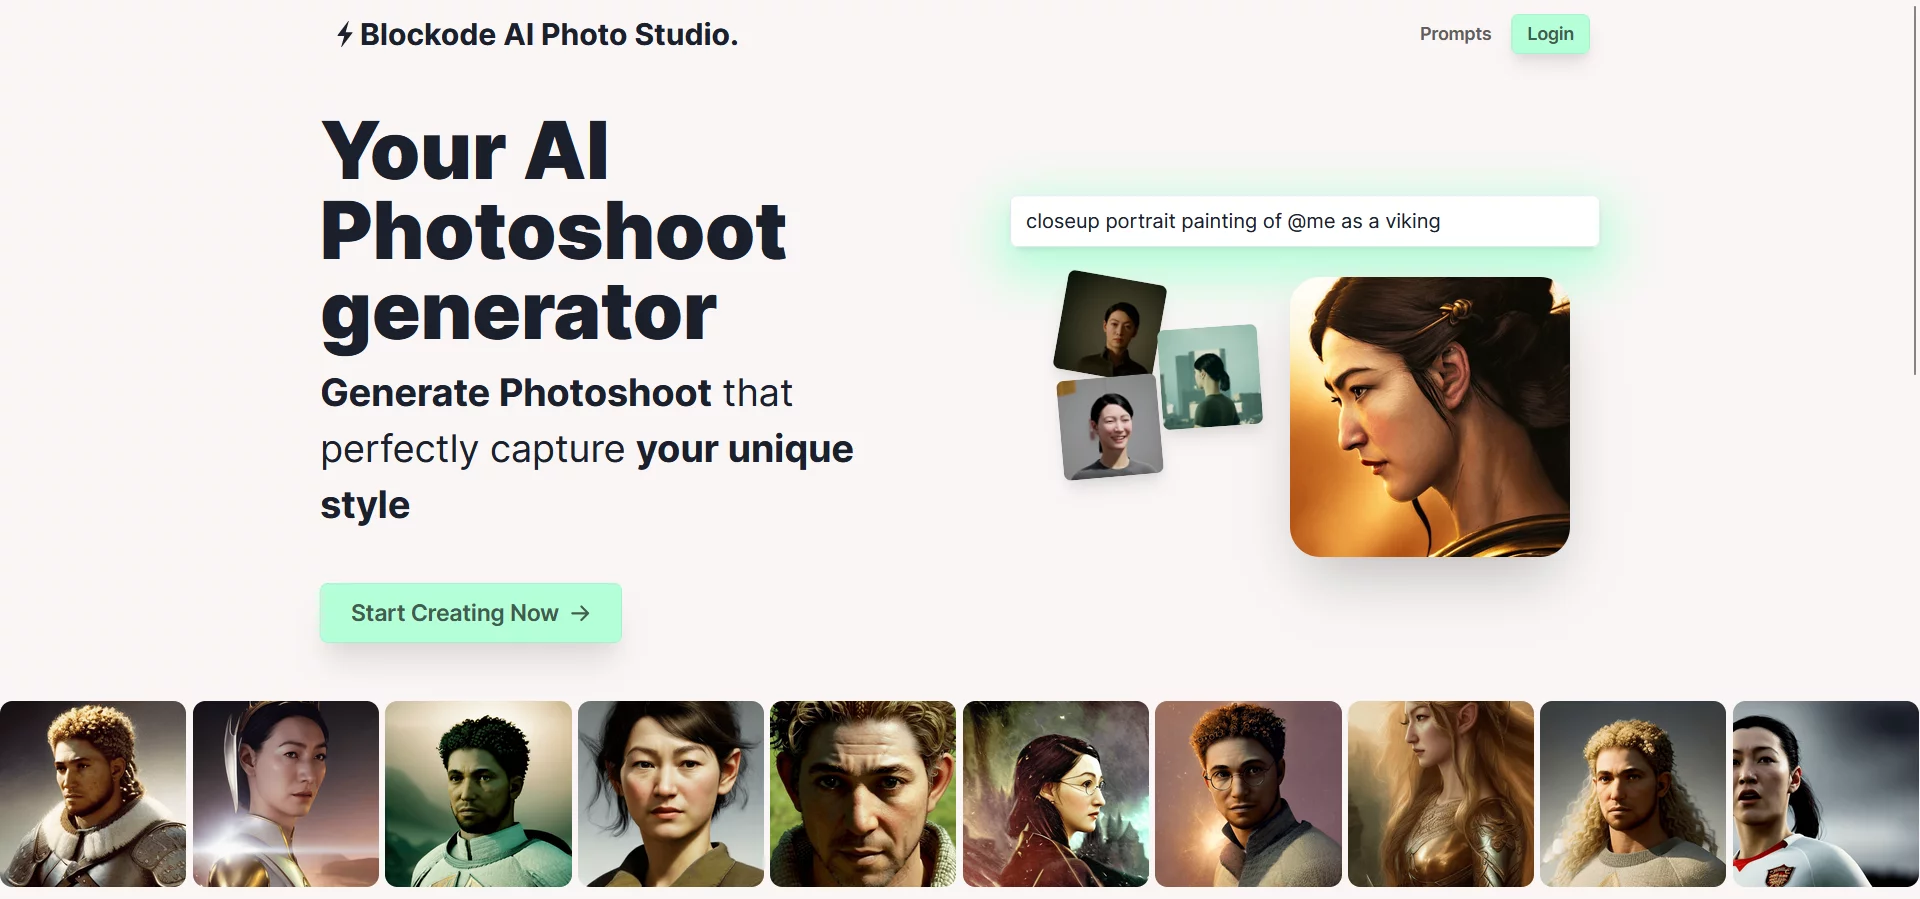  Generate Photoshoot that perfectly capture your